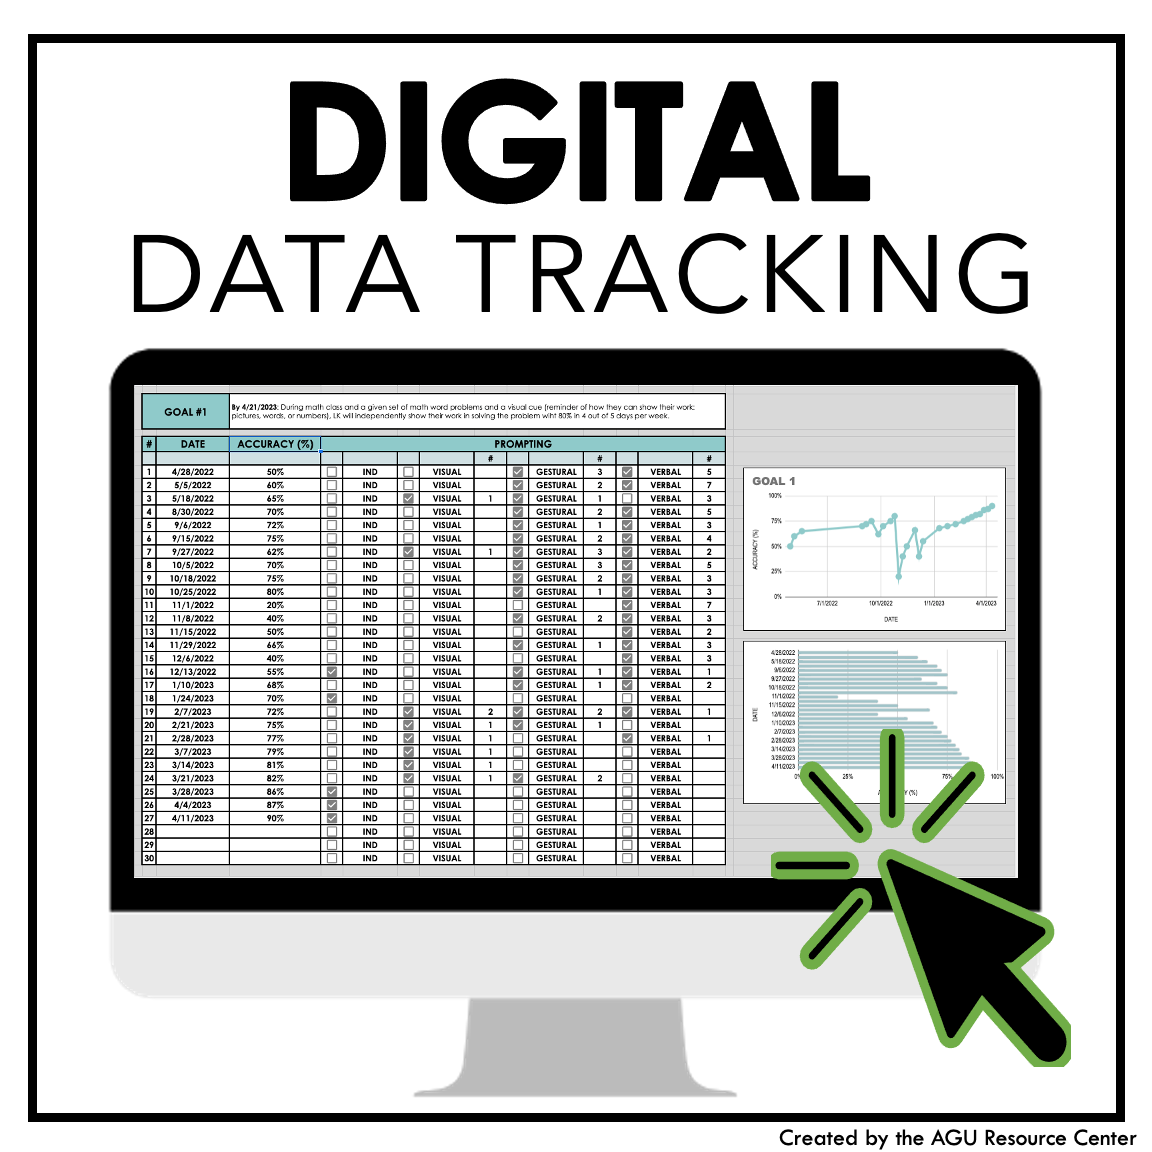 Tracking - DAT